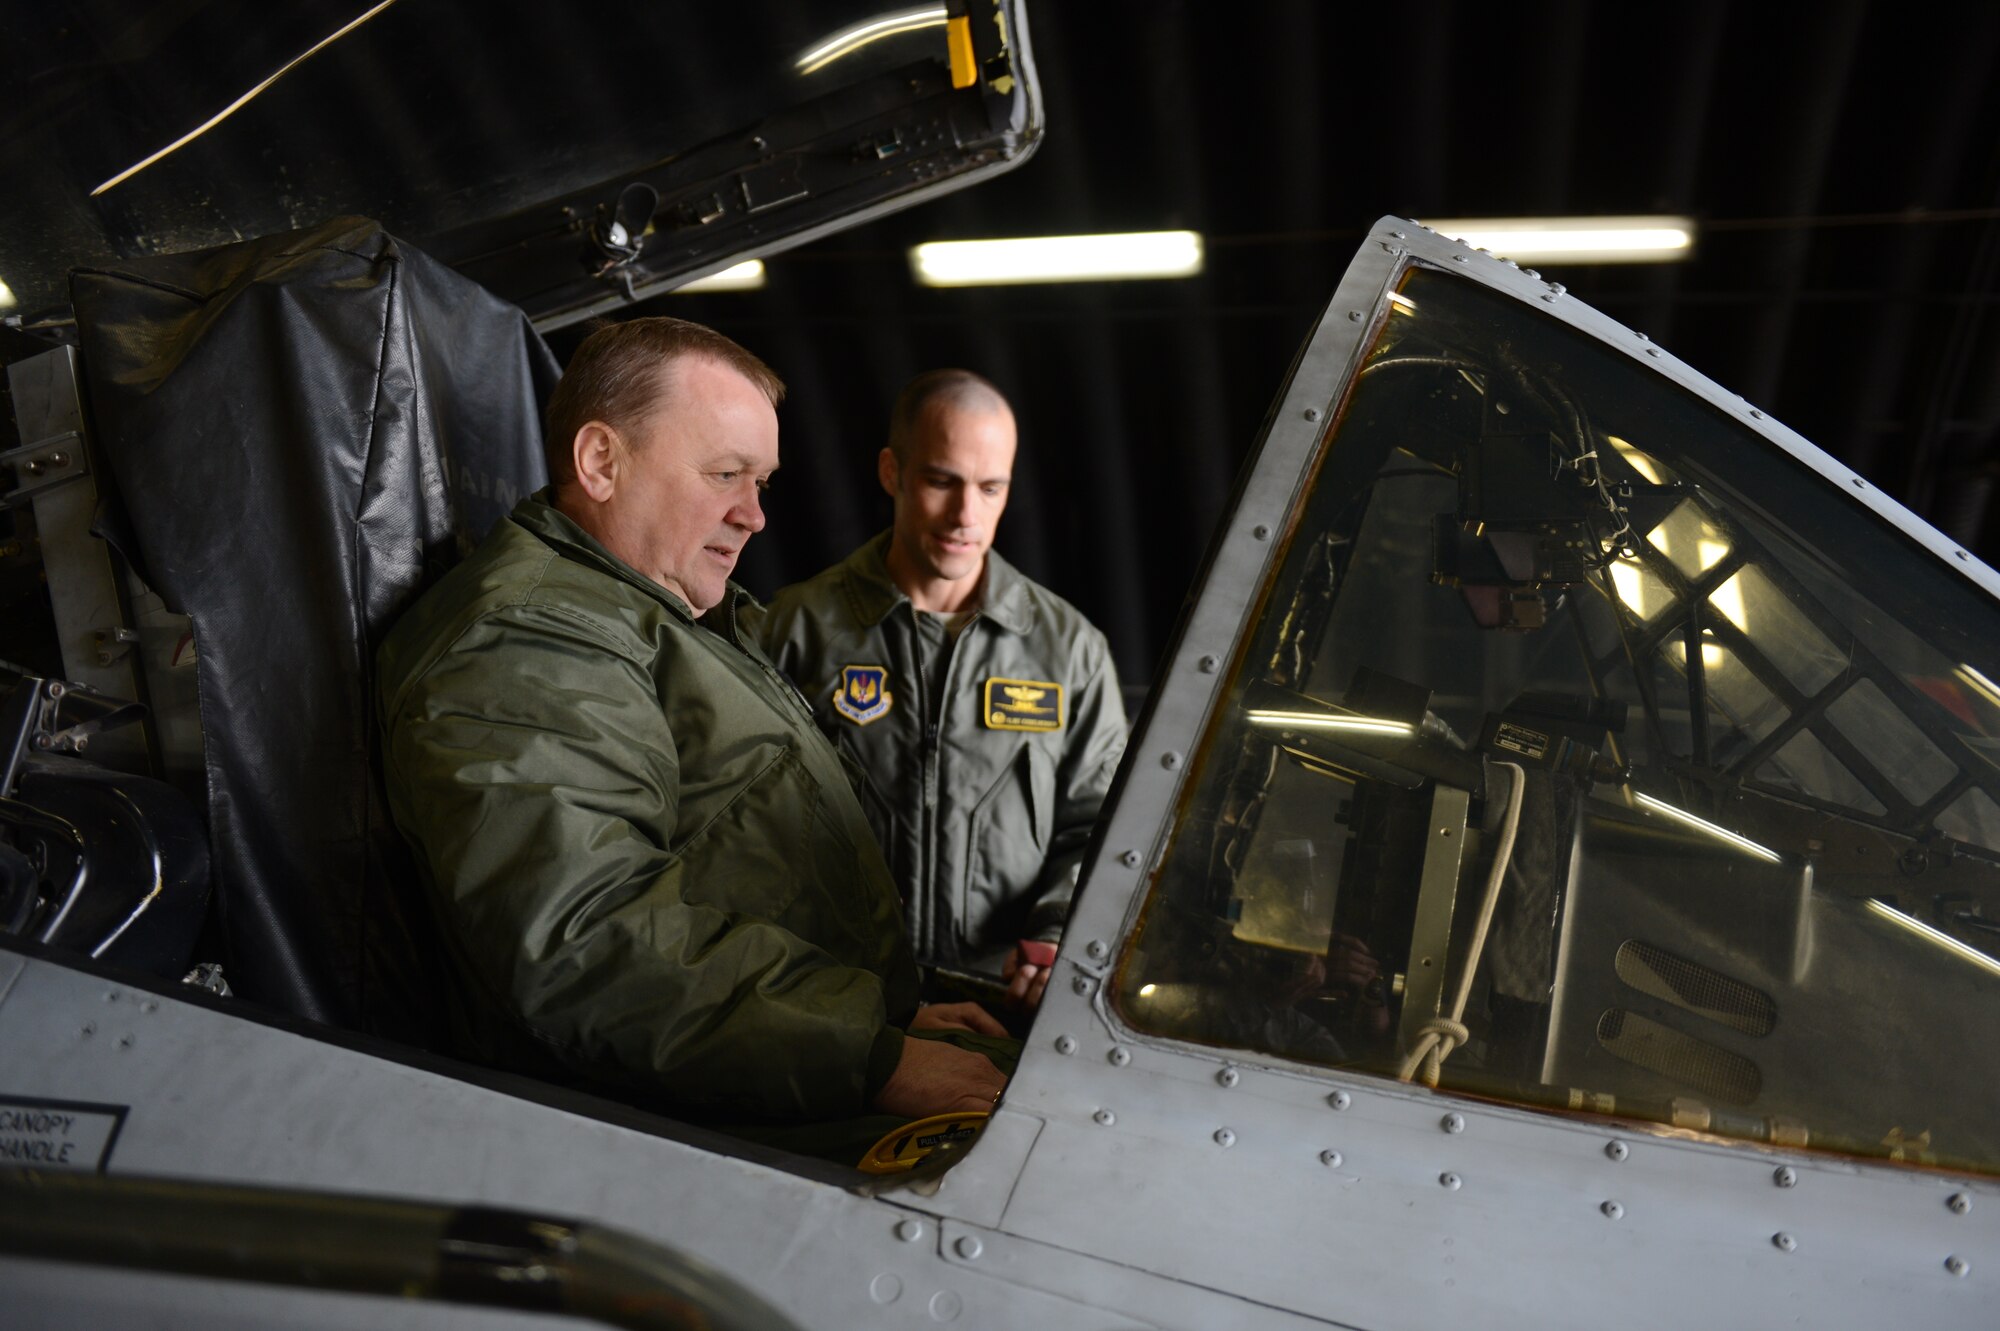 SPANGDAHLEM AIR BASE, Germany – Polish air force Brig. Gen. Wlodzimierz Usarek, left, 2nd Tactical Air Wing commander, studies an A-10 Thunderbolt II cockpit with U.S. Air Force Lt. Col. Clinton Eichelberger, 81st Fighter Squadron commander from Annapolis, Md., on the flightline during a visit to Spangdahlem AB Nov. 27, 2012. Usarek was accompanied by Polish air force Brig. Gen. Tadeusz Mikutel, 1st Tactical Air Wing commander and Col. Kristian Ziec, 32nd Air Base commander during the tour around the base. (U.S. Air Force photo by Airman 1st Class Gustavo Castillo/Released)